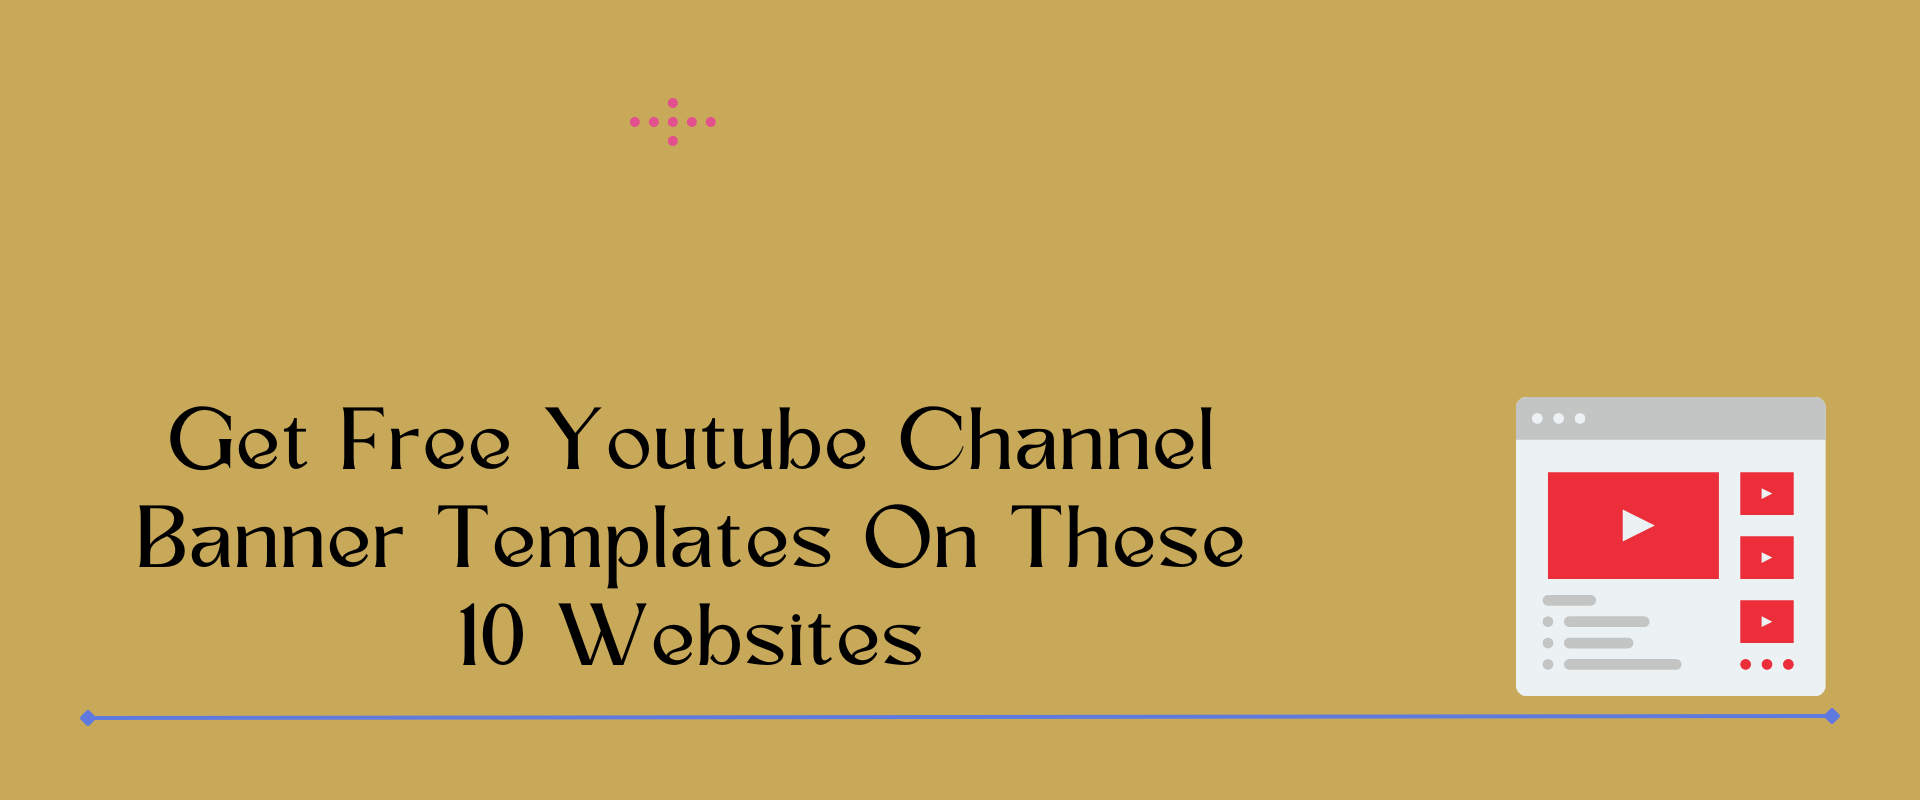 youtube channel banner templates